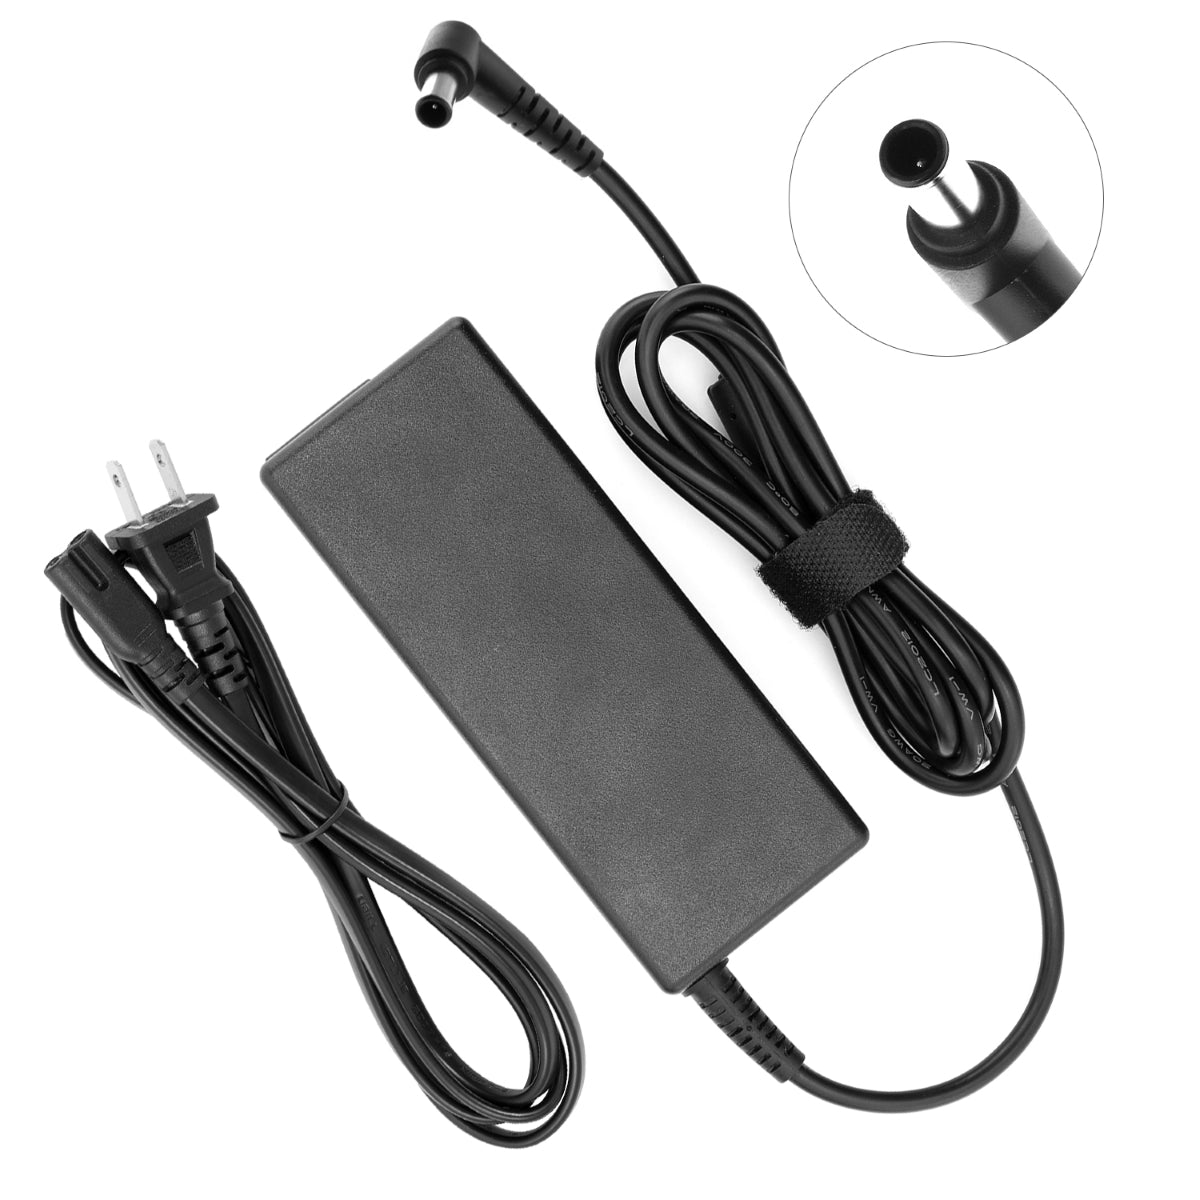 AC Adapter Power Supply for Samsung SyncMaster A3514-FPN Monitor